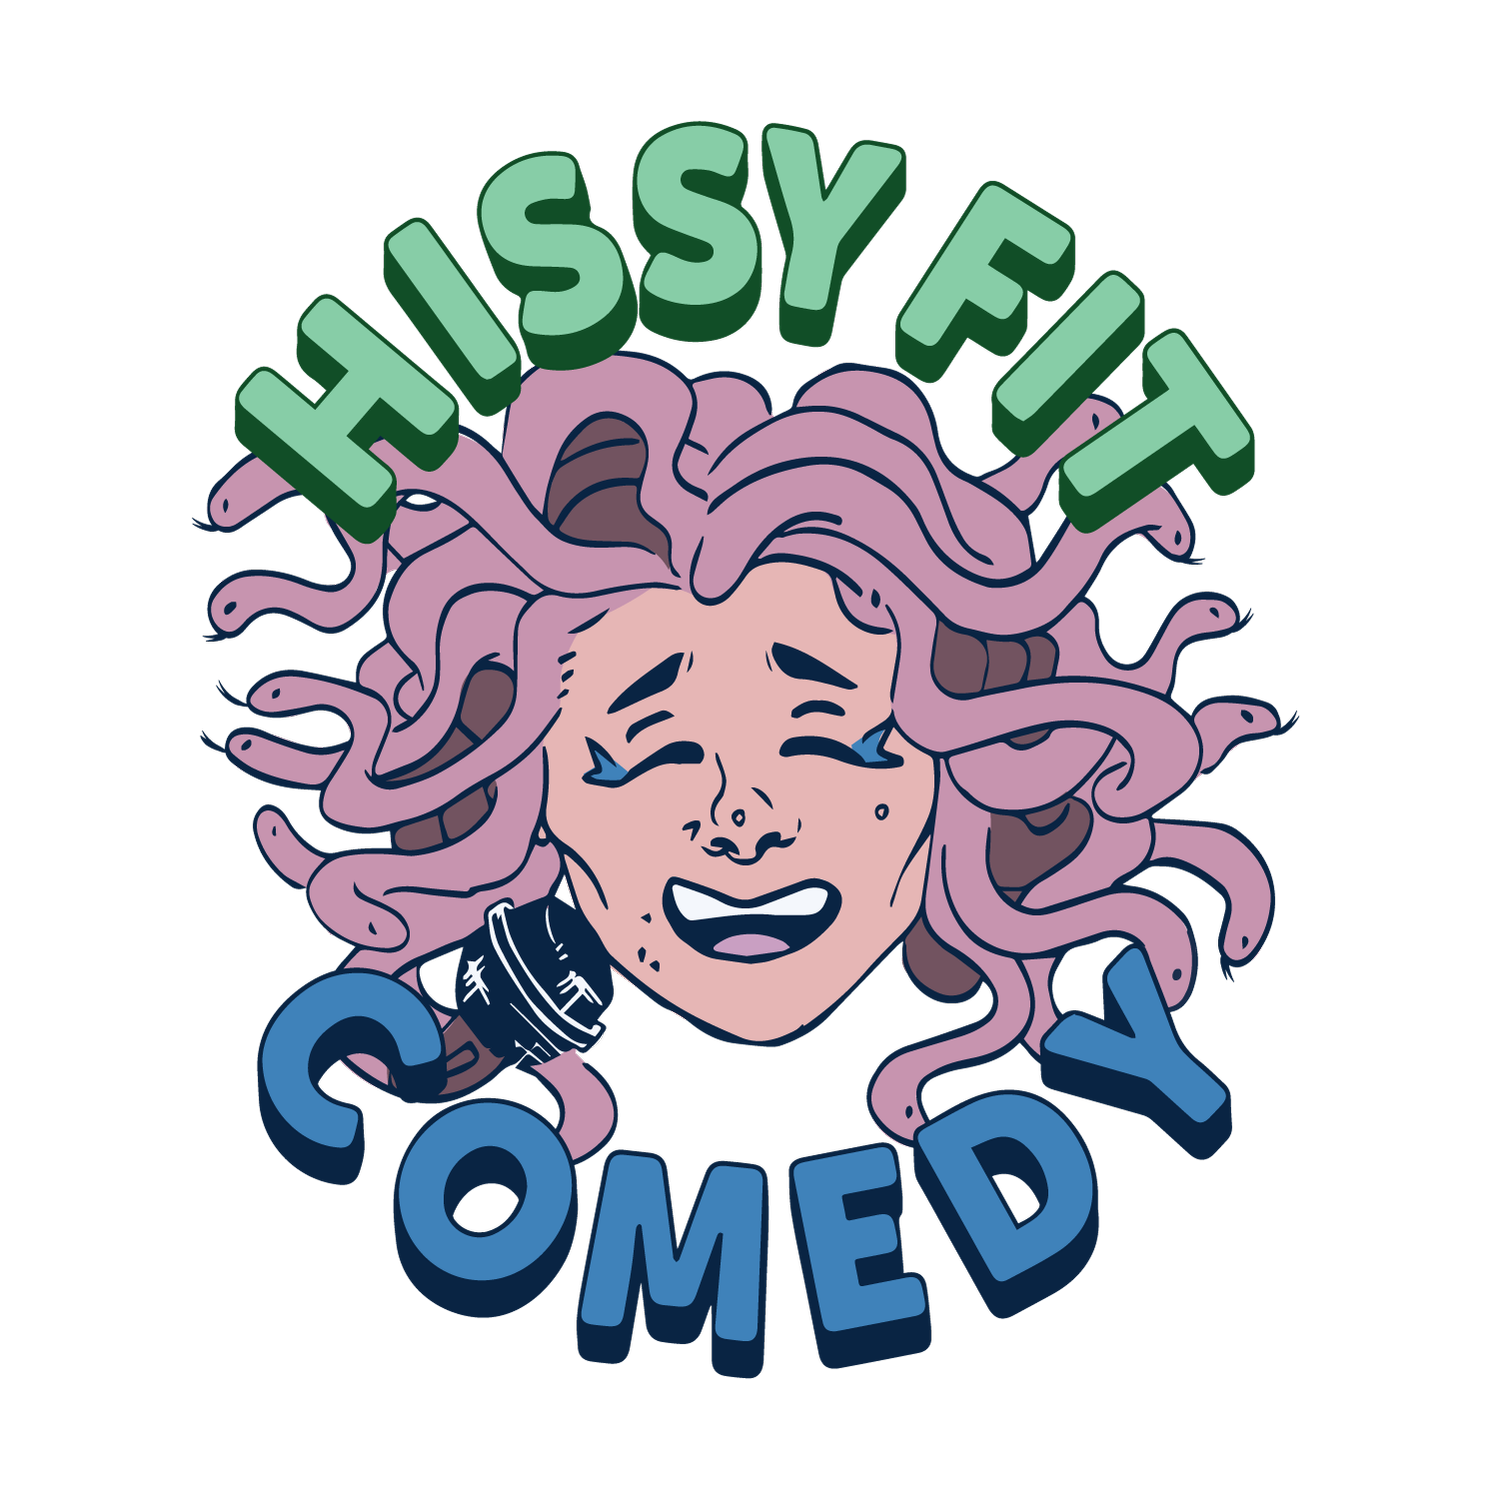 Hissy Fit Comedy